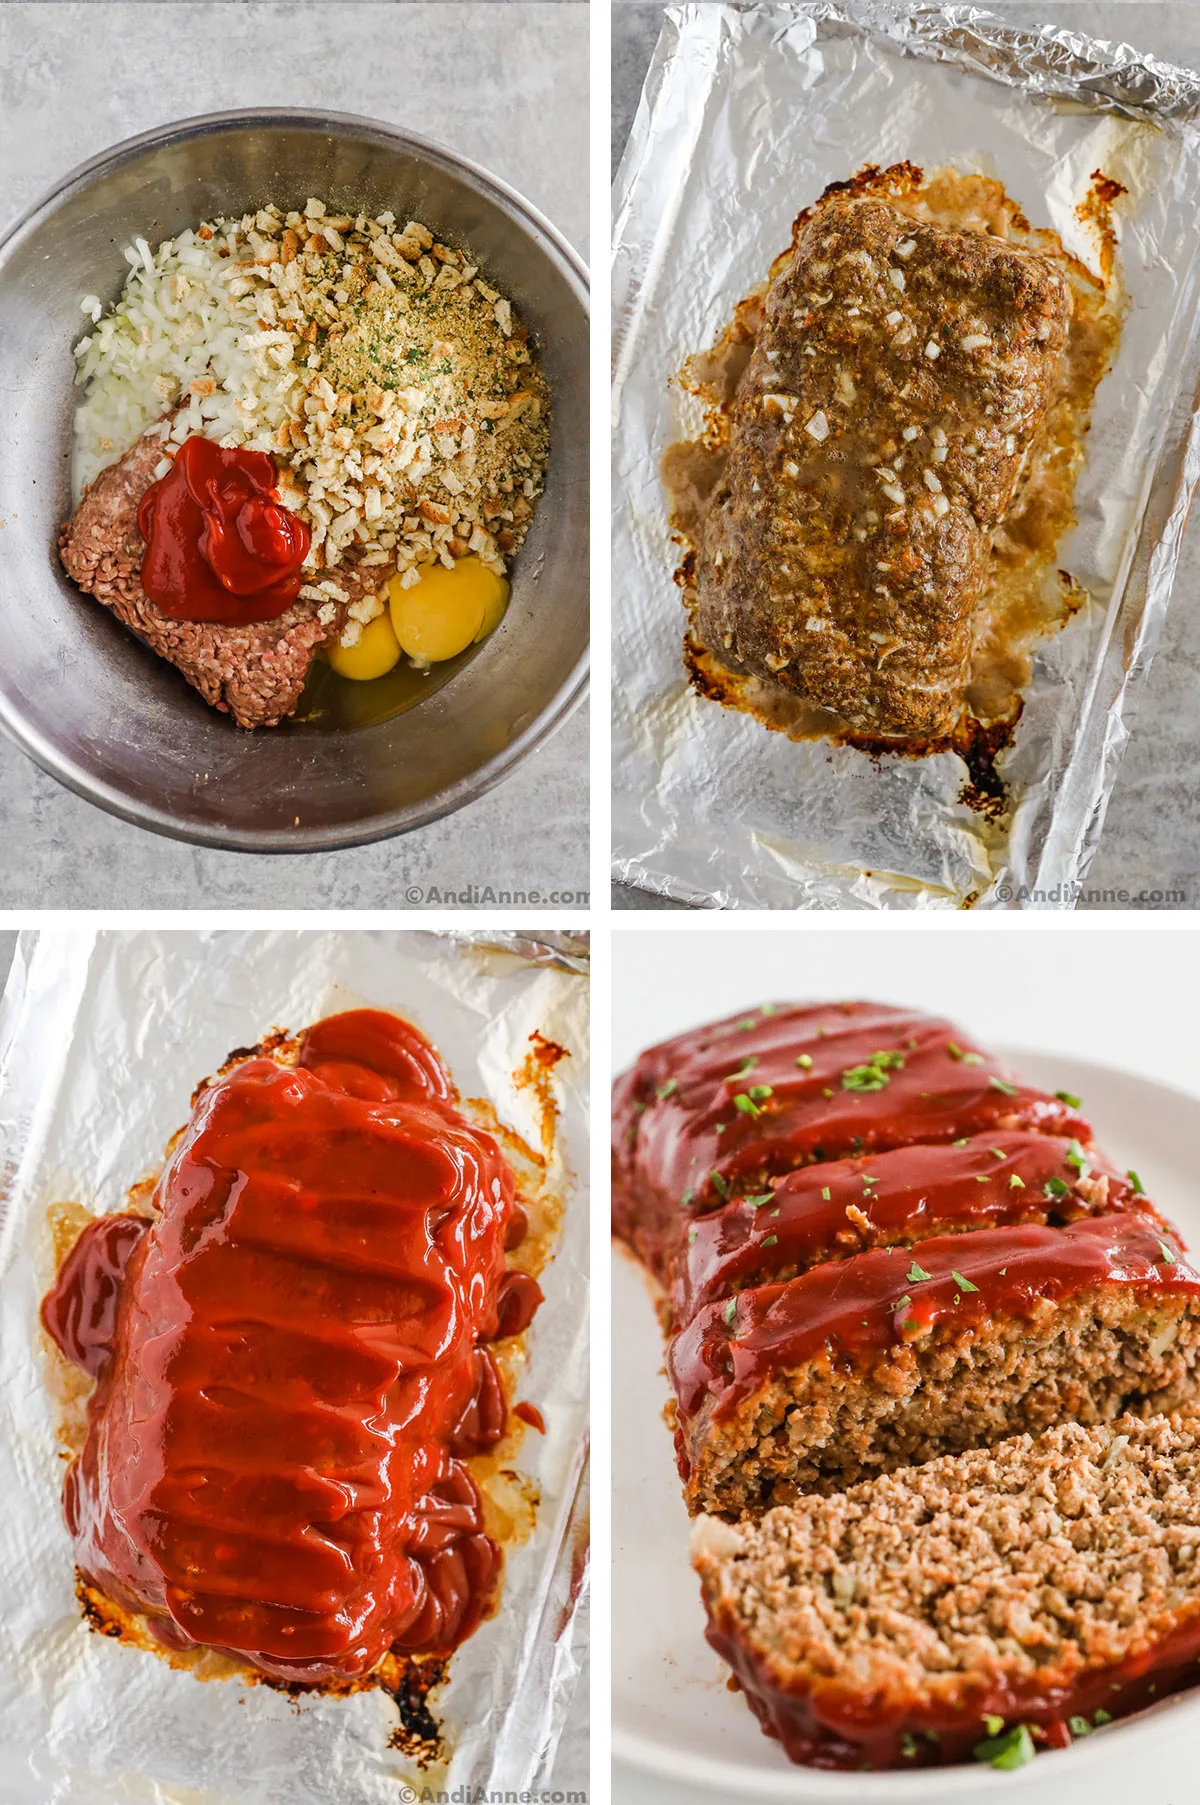 Four images showing steps to make recipe. First is steel bowl with meatloaf ingredients dumped in. Second is cooked meatloaf without topping. Third is cooked meatloaf with ketchup topping spread on. Fourth is sliced meatloaf on a plate.